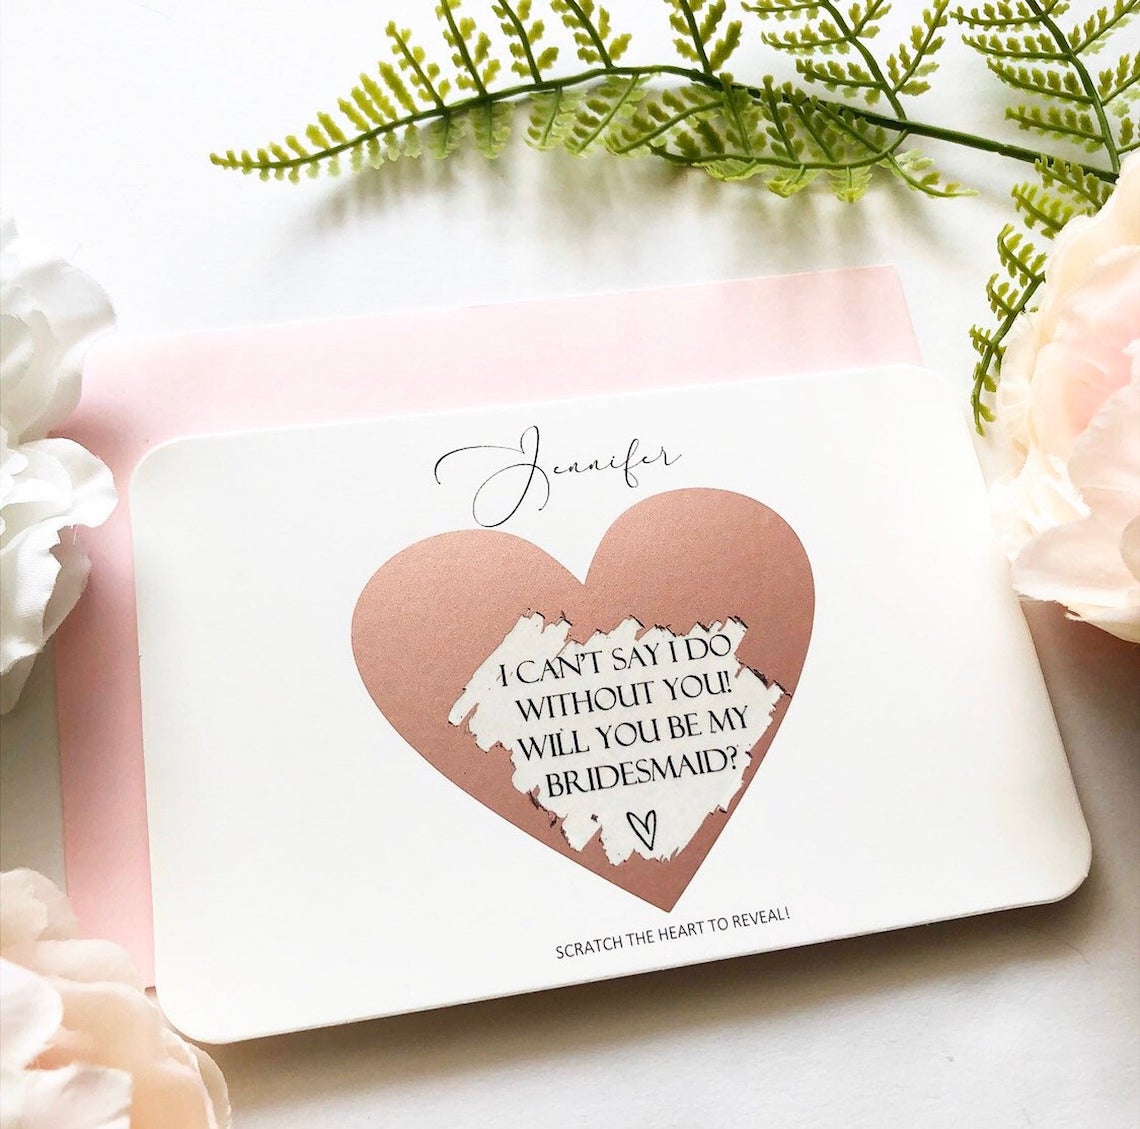 The Best Will You Be My Bridesmaid Cards Bridal Musings 5 - 20 tấm thiệp "Will You Be My Bridesmaid" hay nhất